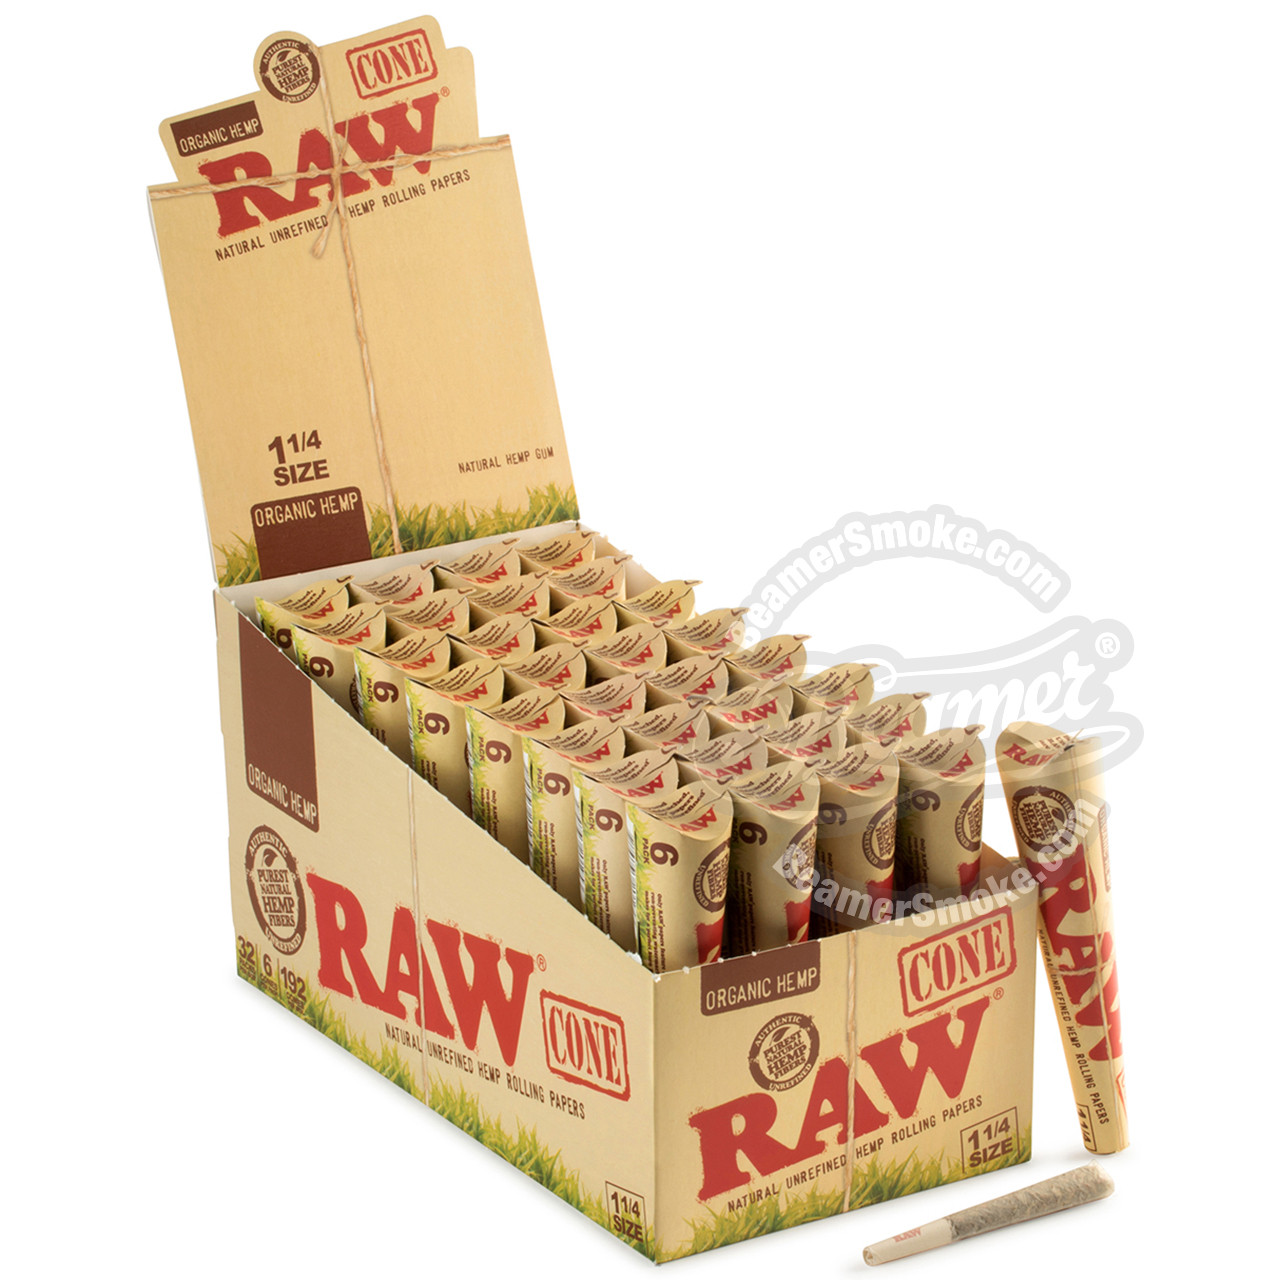 12 Pack of King Size Organic Hemp Cone Rolling Papers by Raw Rolling Papers 